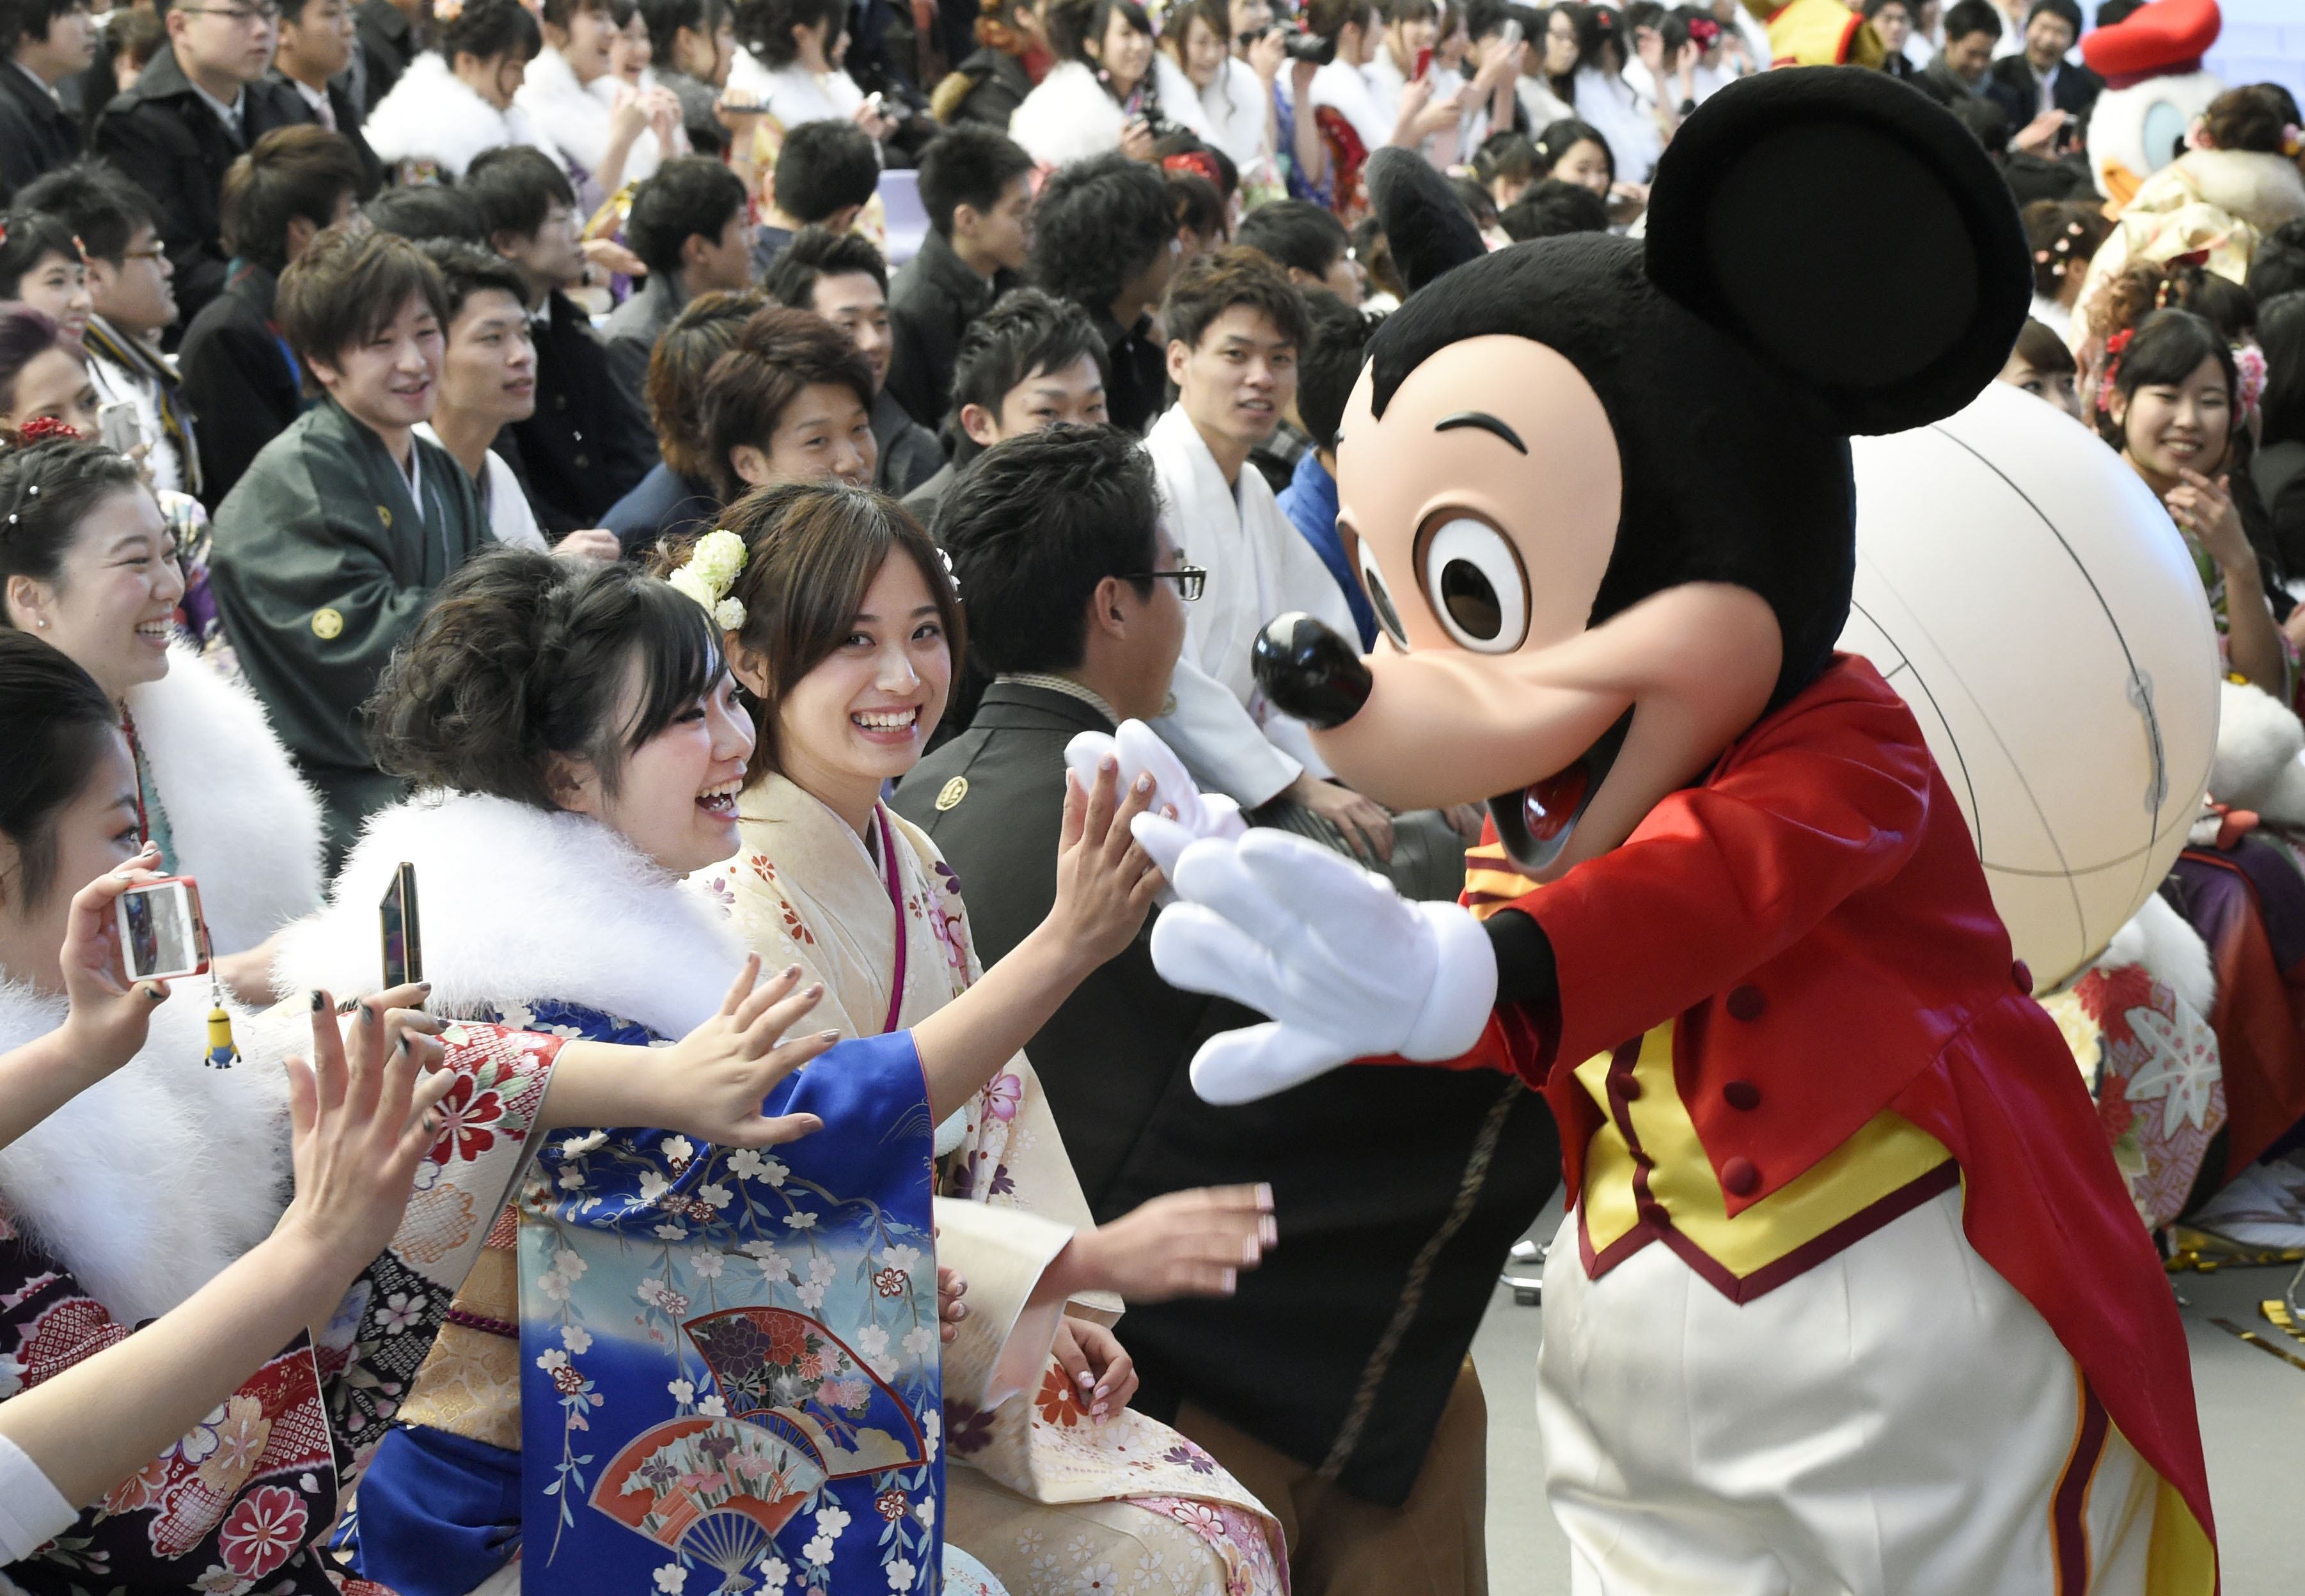 Mickey Mouse congratulates those who attended a coming-of-age ceremony at Tokyo Disneyland in Urayasu, near Tokyo, Japan, on Jan. 12, 2015 (Kyodo/AP)